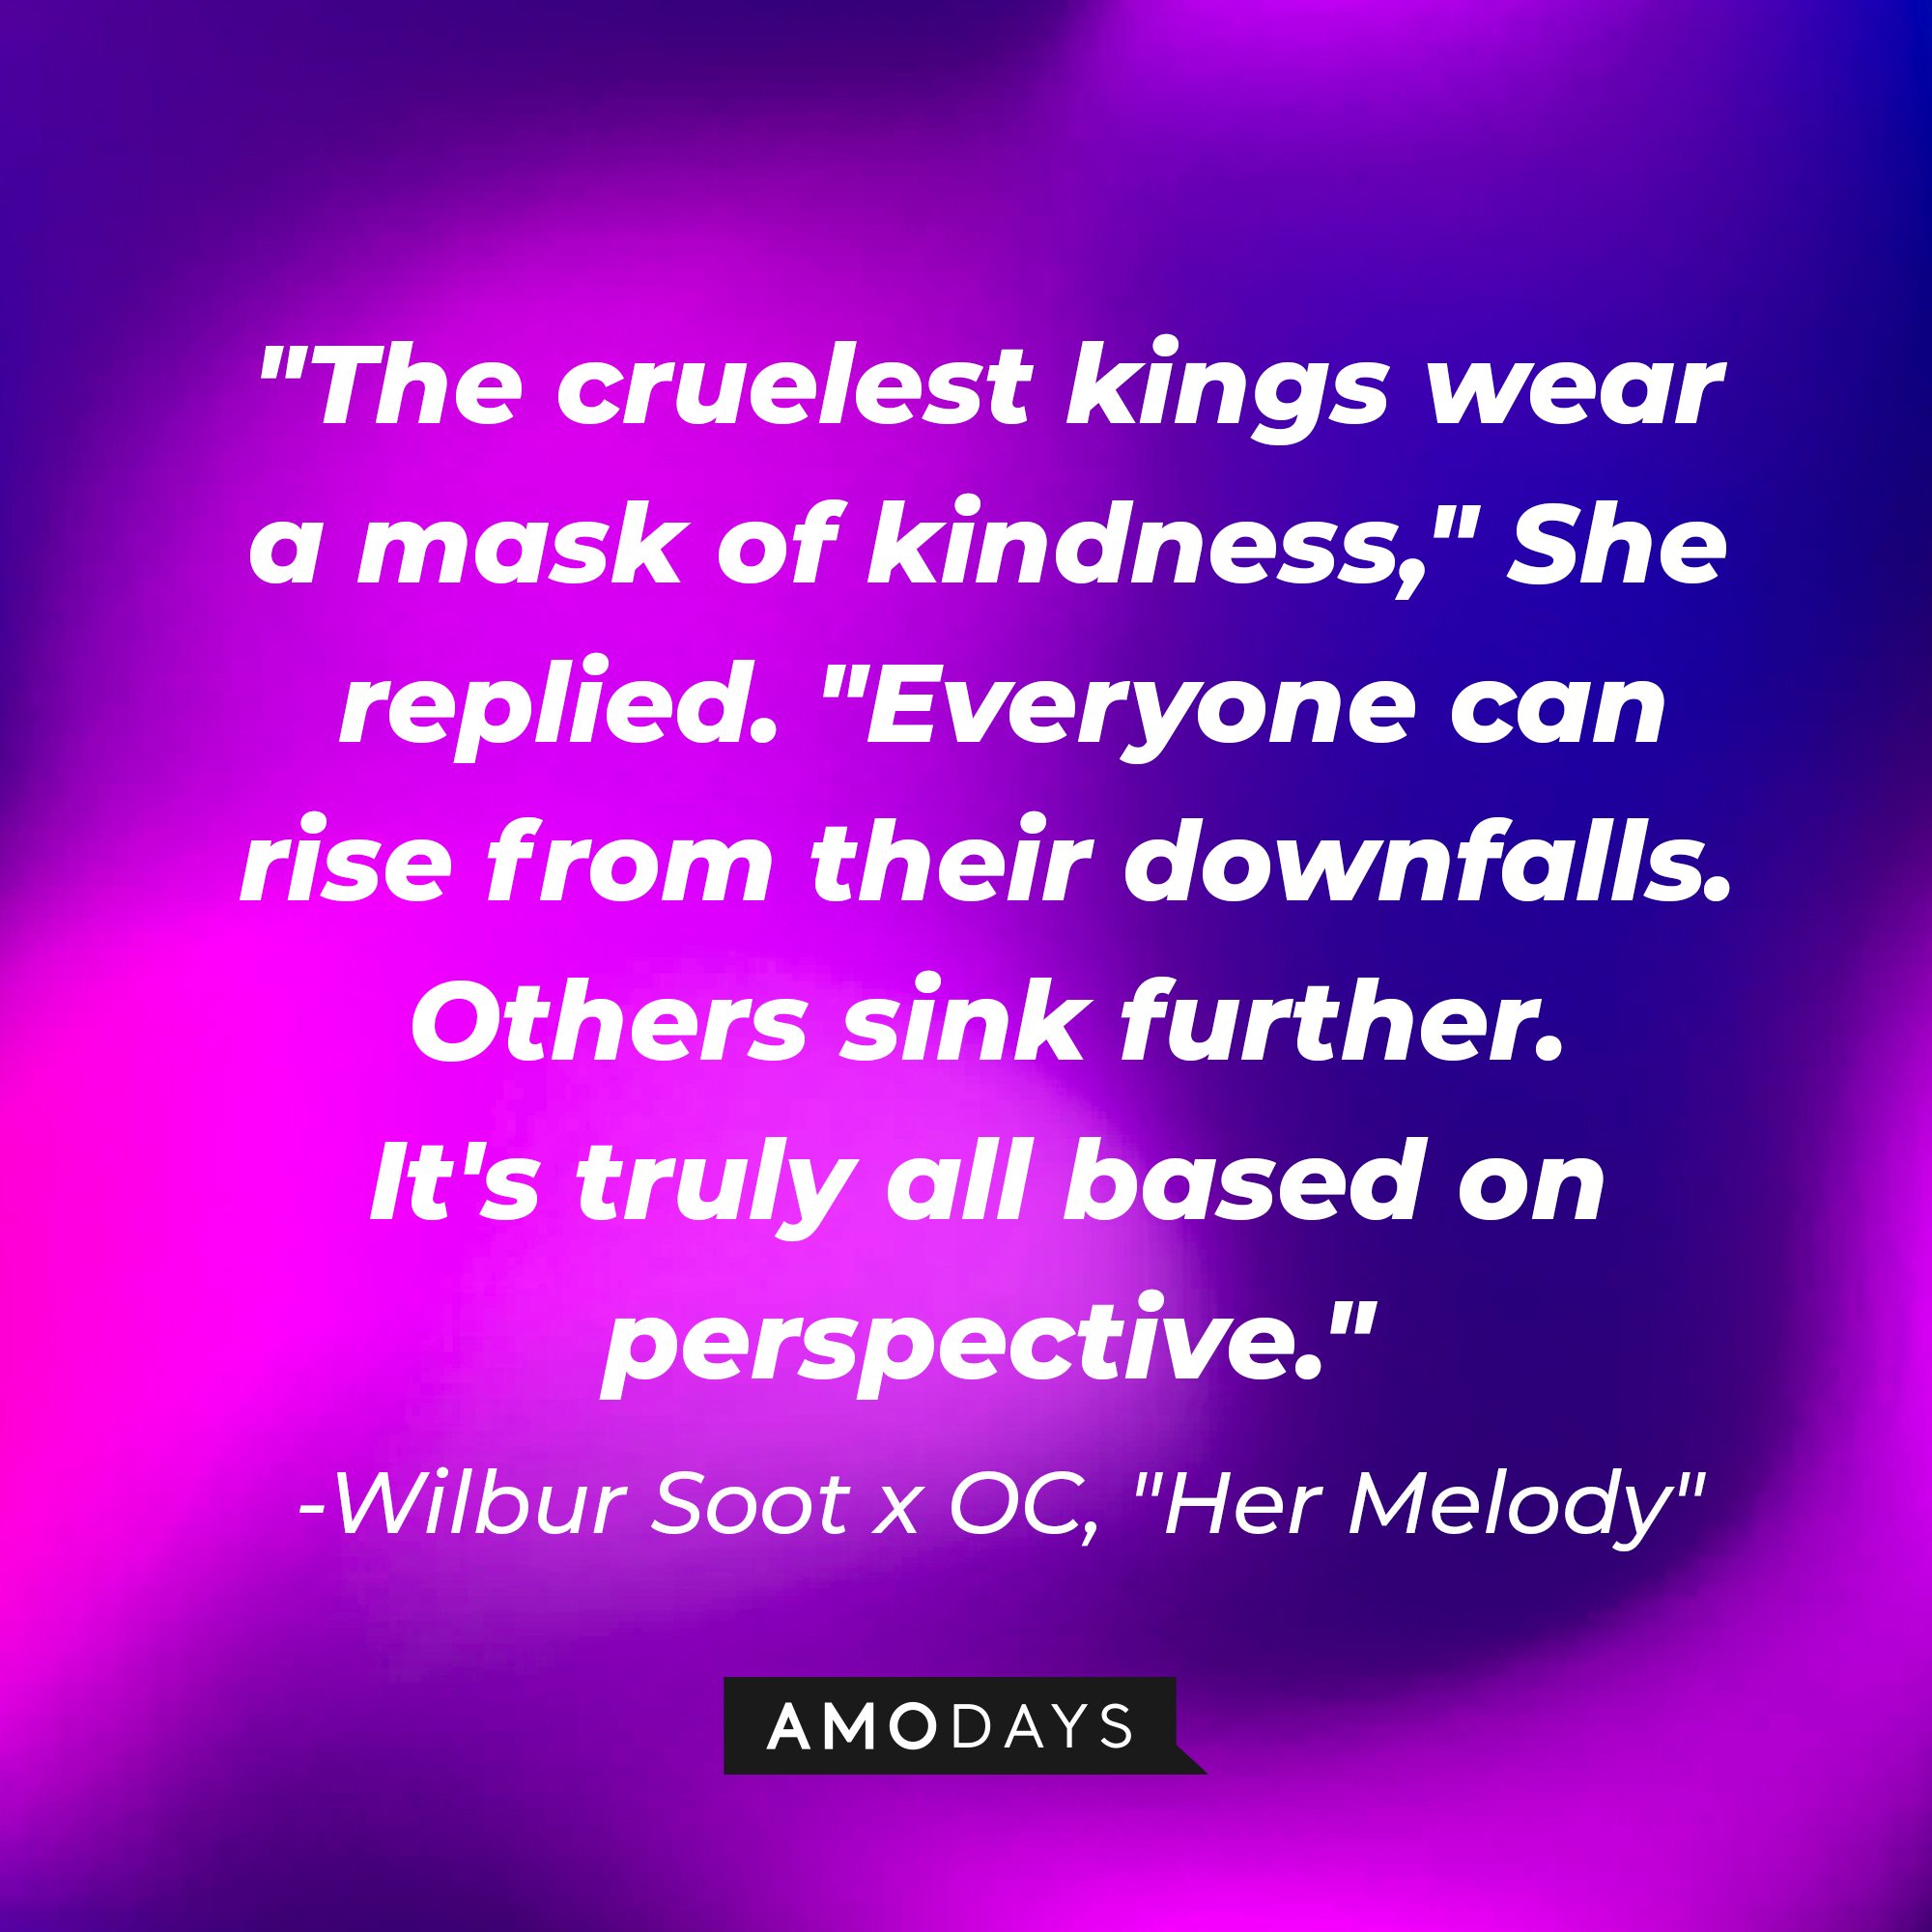 Wilbur Soot and OC's quote: "The cruelest kings wear a mask of kindness," She replied. "Everyone can rise from their downfalls. Others sink further. It's truly all based on perspective." | Image: AmoDays